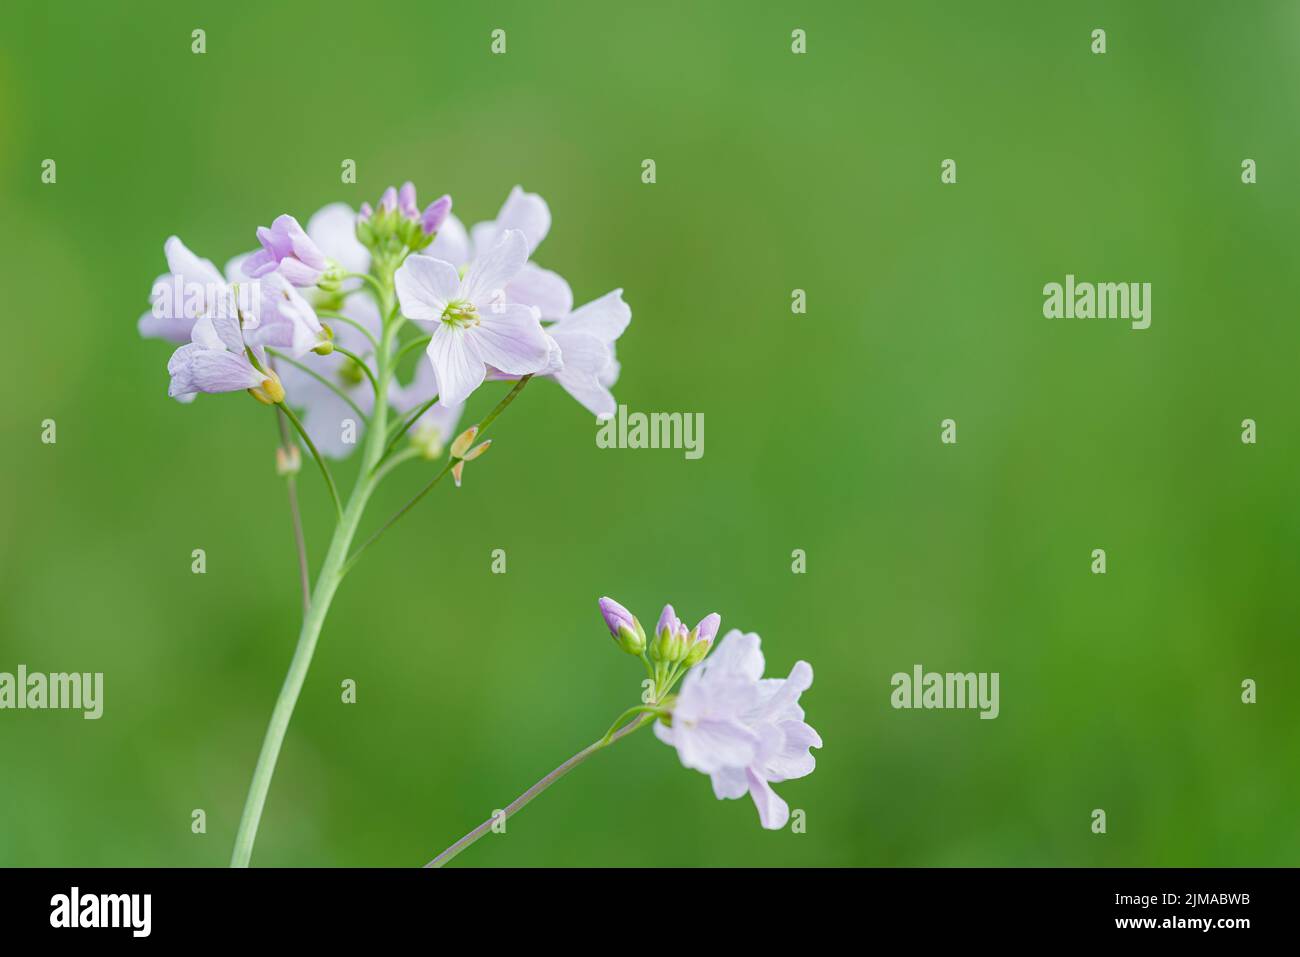 Cuckooflower or Lady's Smock (Cardamine pratensis) in flower in a meadow in spring in the South West of England. Stock Photo